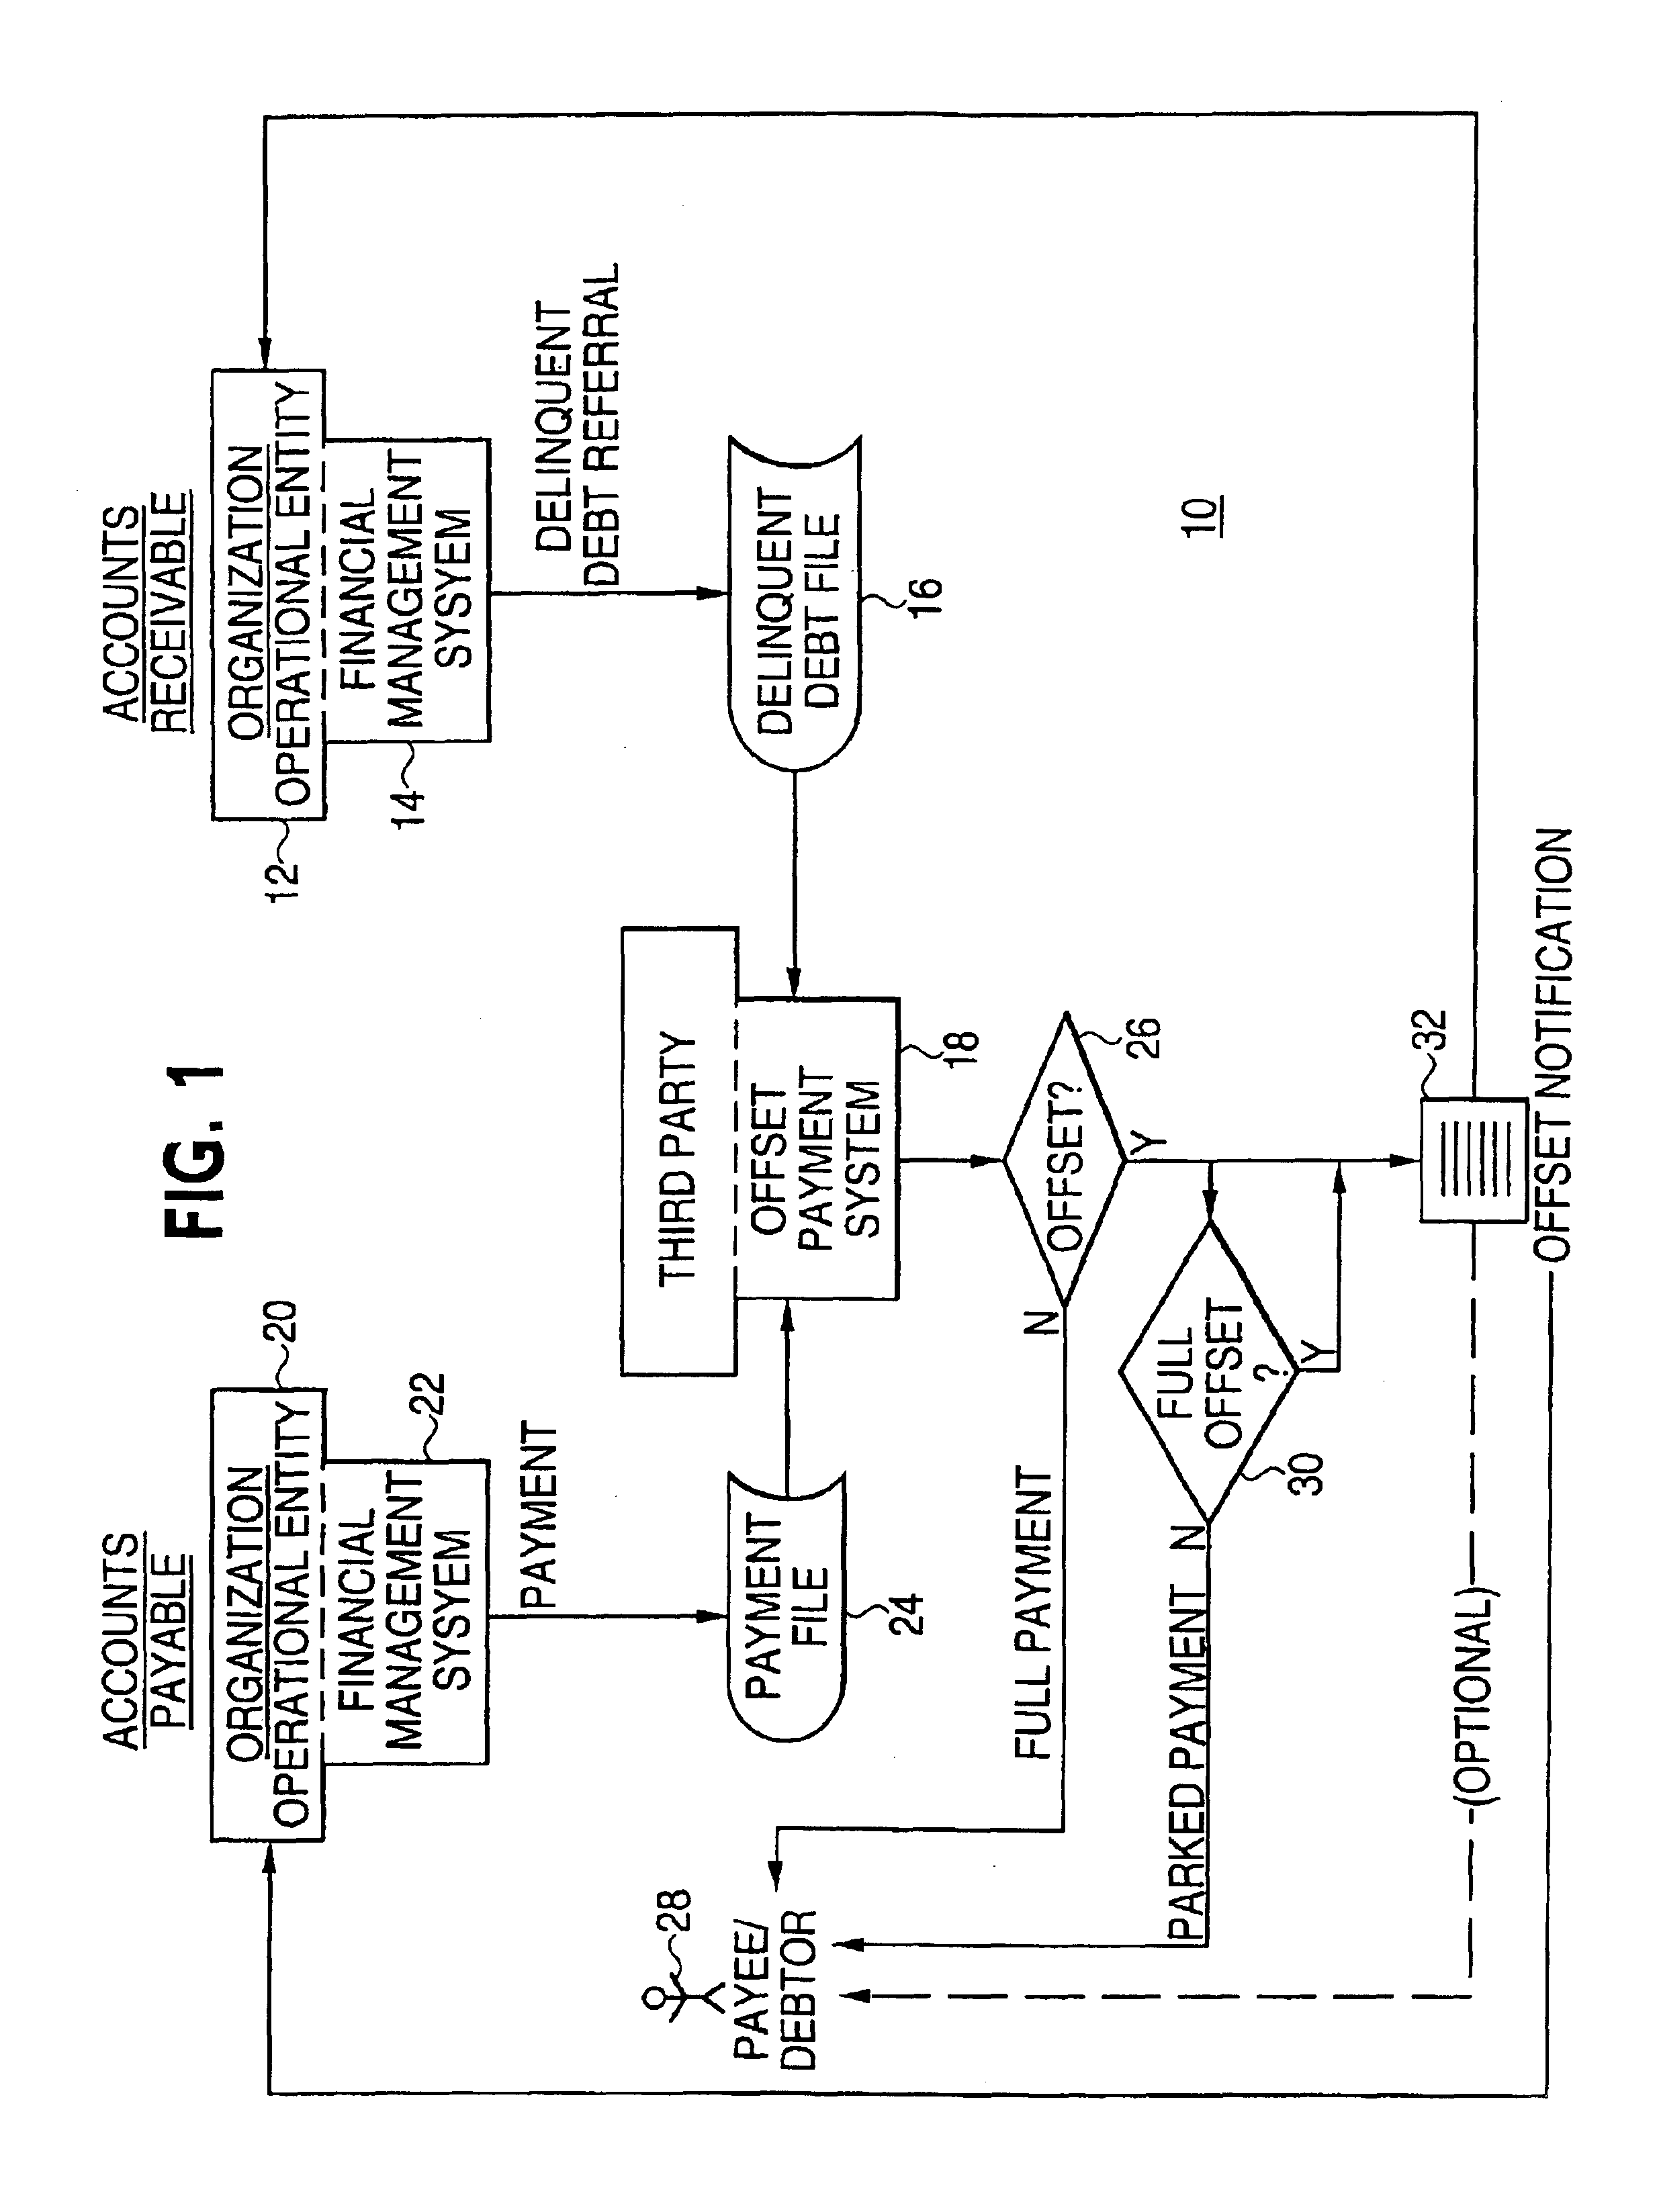 Financial management system including an offset payment process